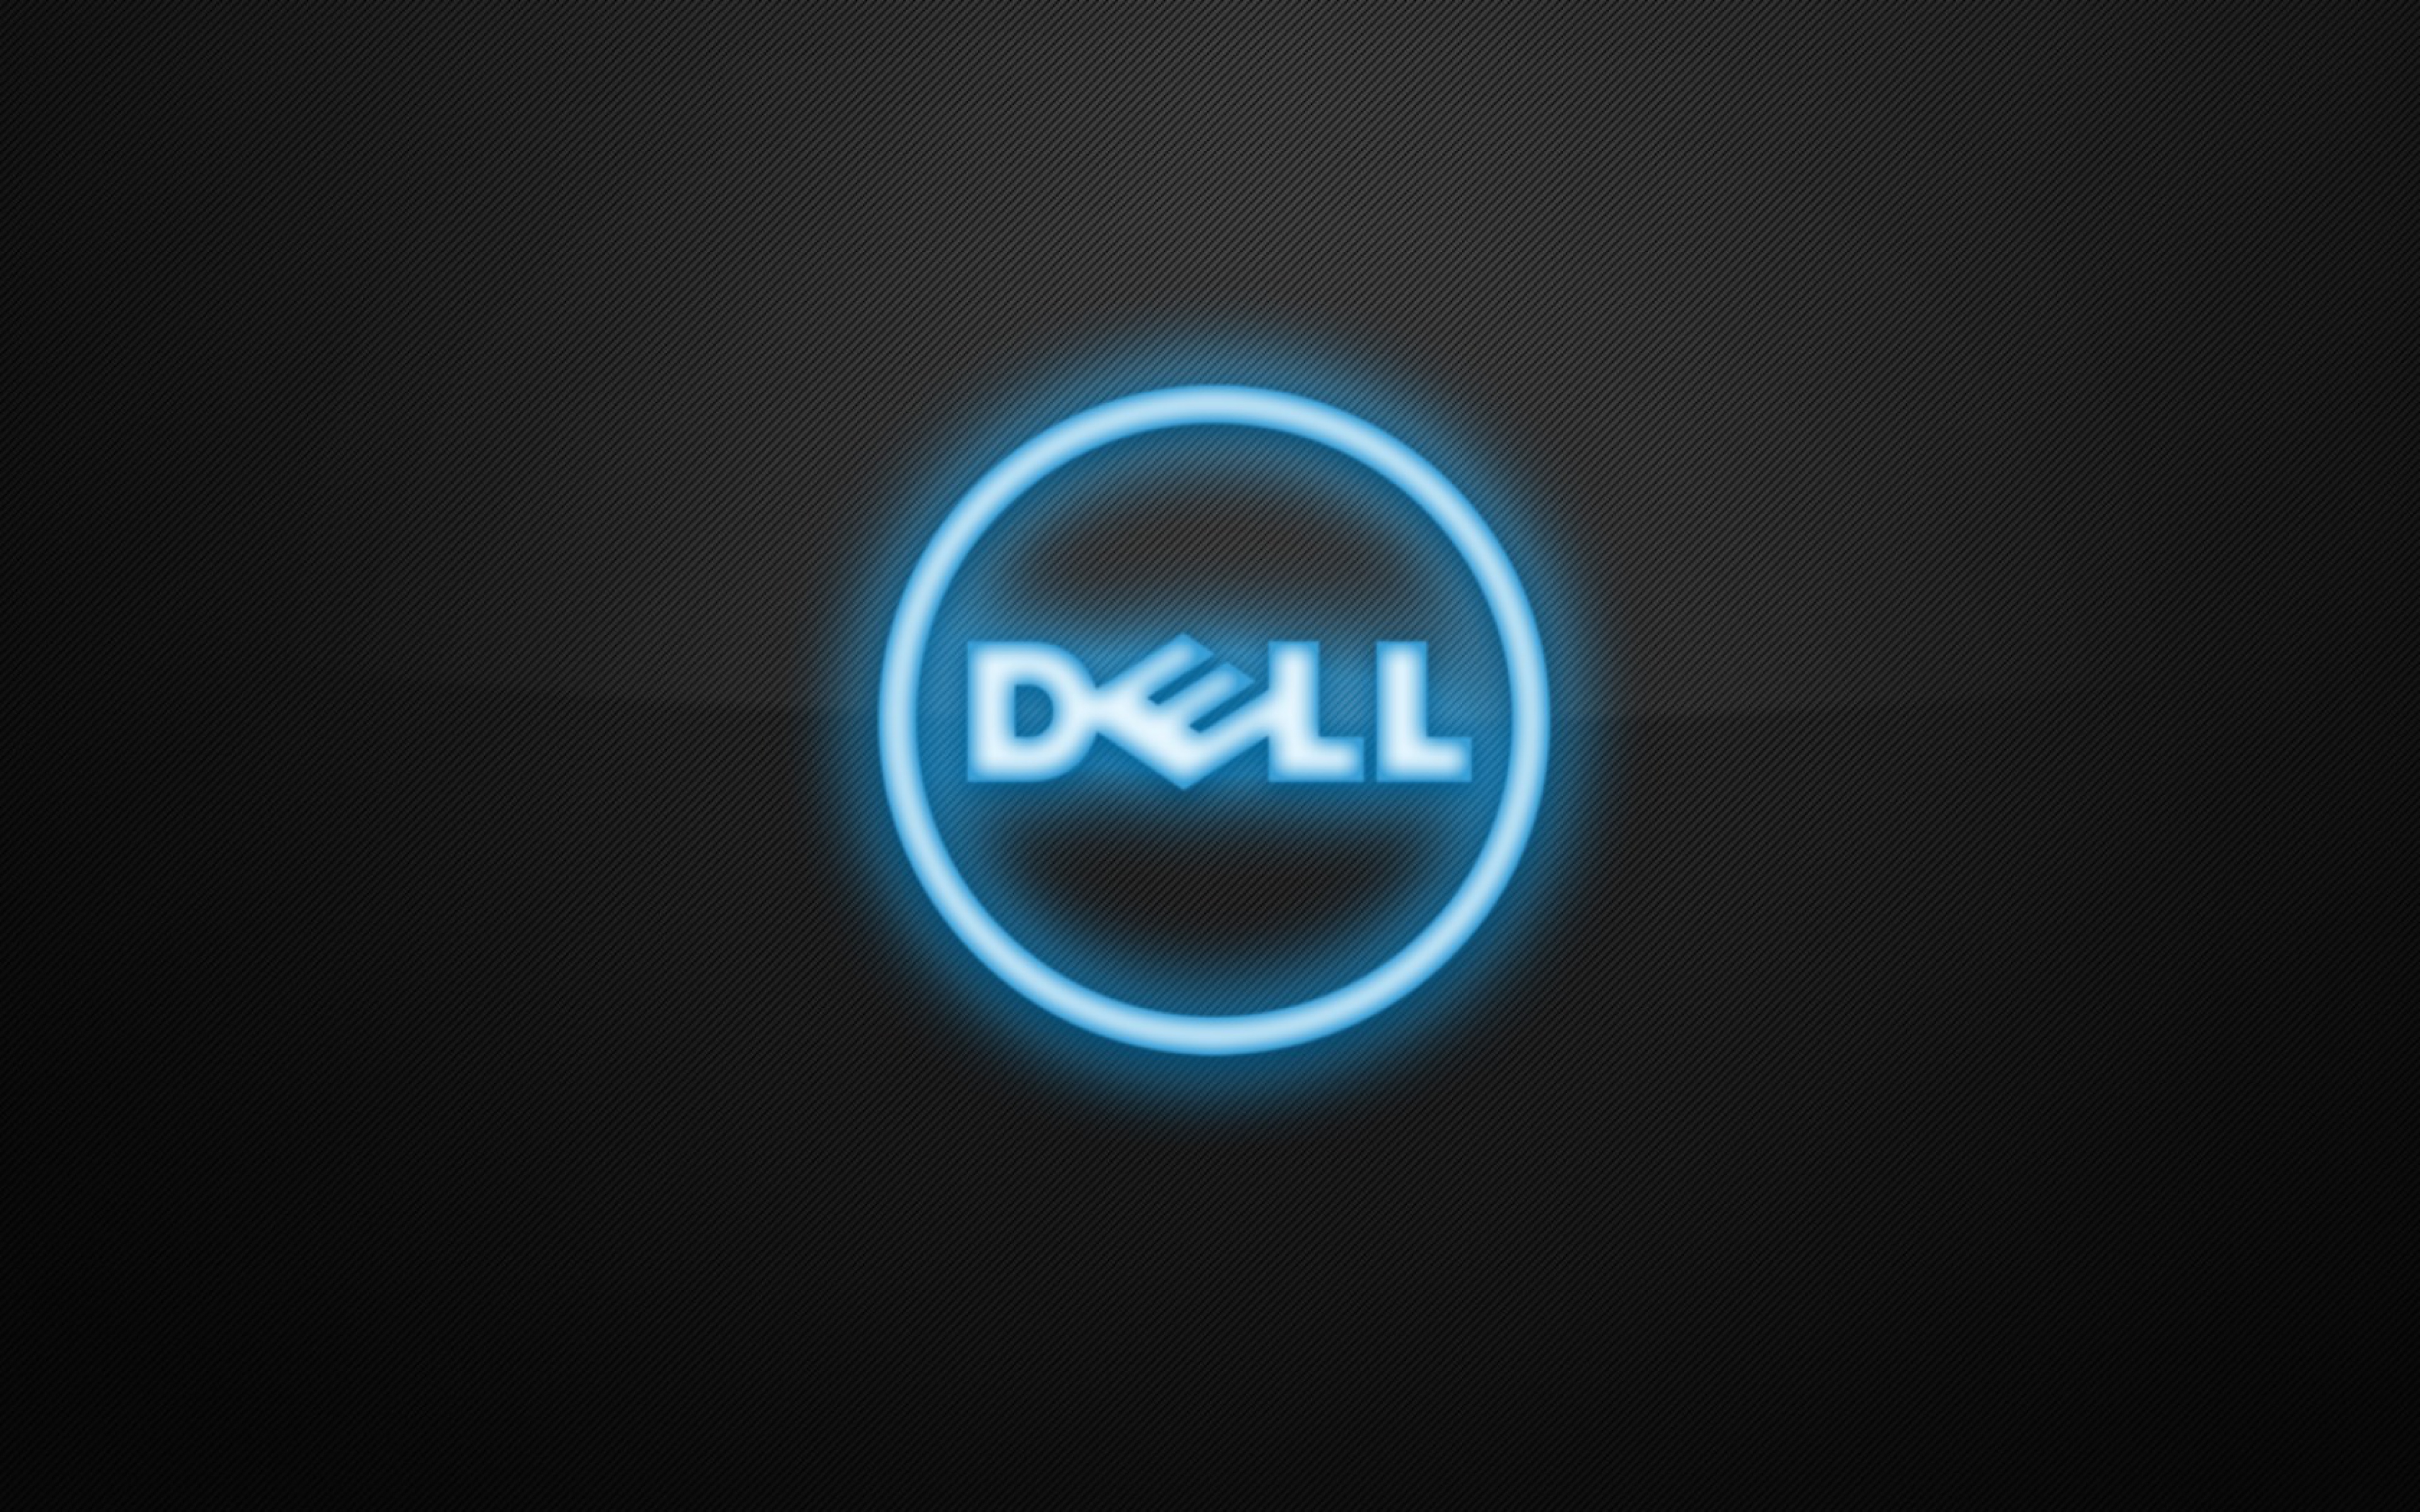 Dell 4k Wallpaper Wallpapersafari Images and Photos finder